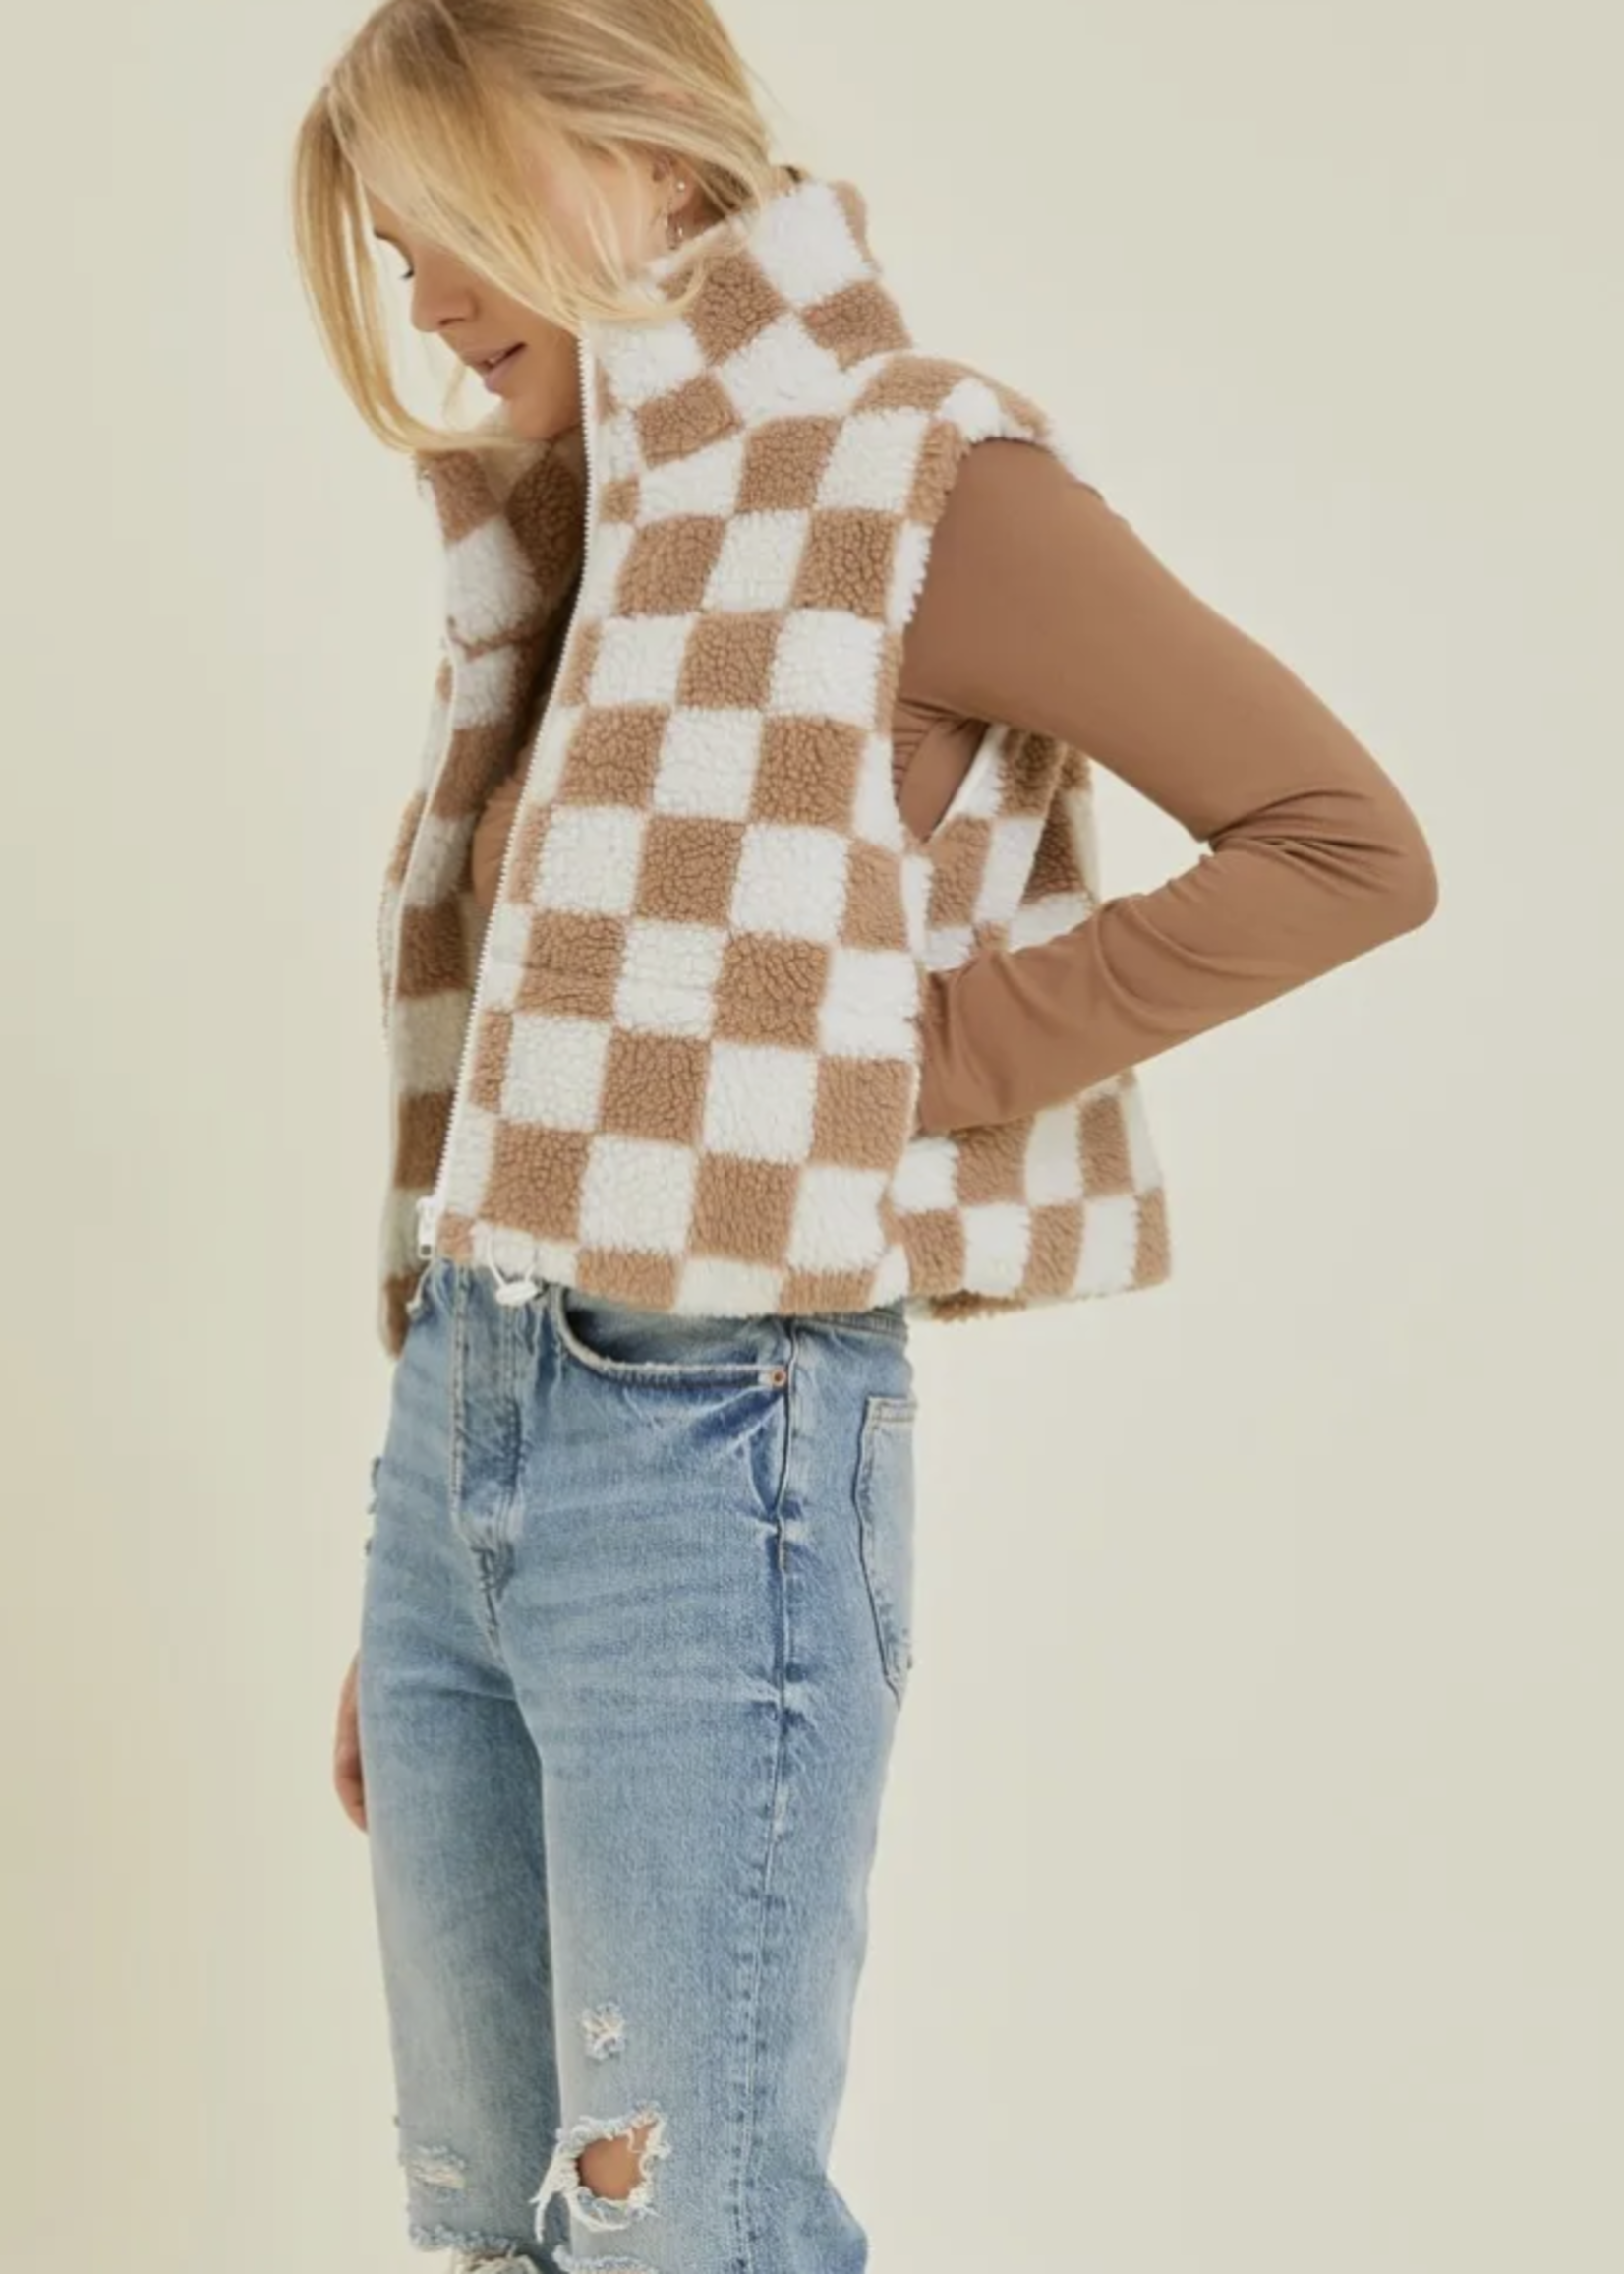 BAE 40% OFF Audrey Sherpa Vest | Taupe Checkered